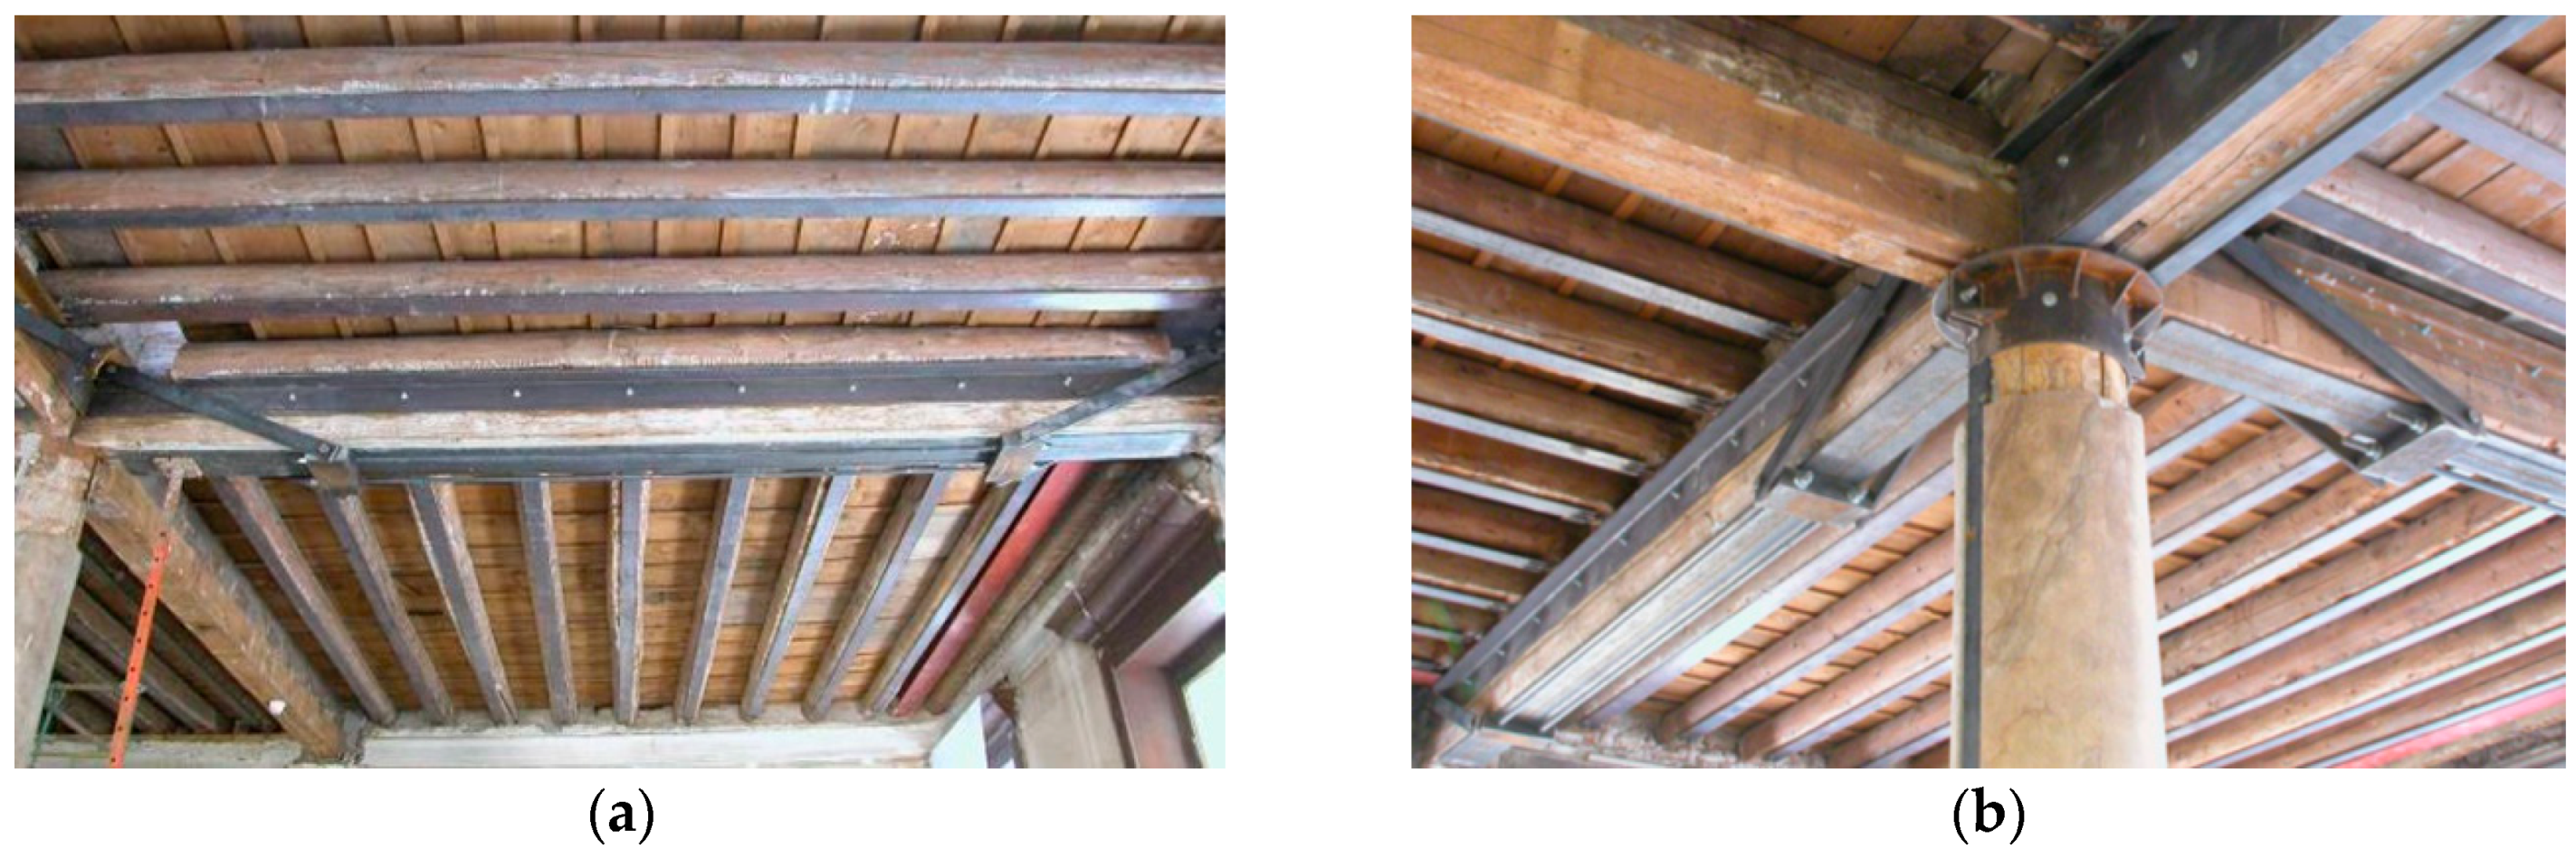 Metals | Free Full-Text | Repair and Reinforcement of Historic Timber  Structures with Stainless Steel—A Review | HTML